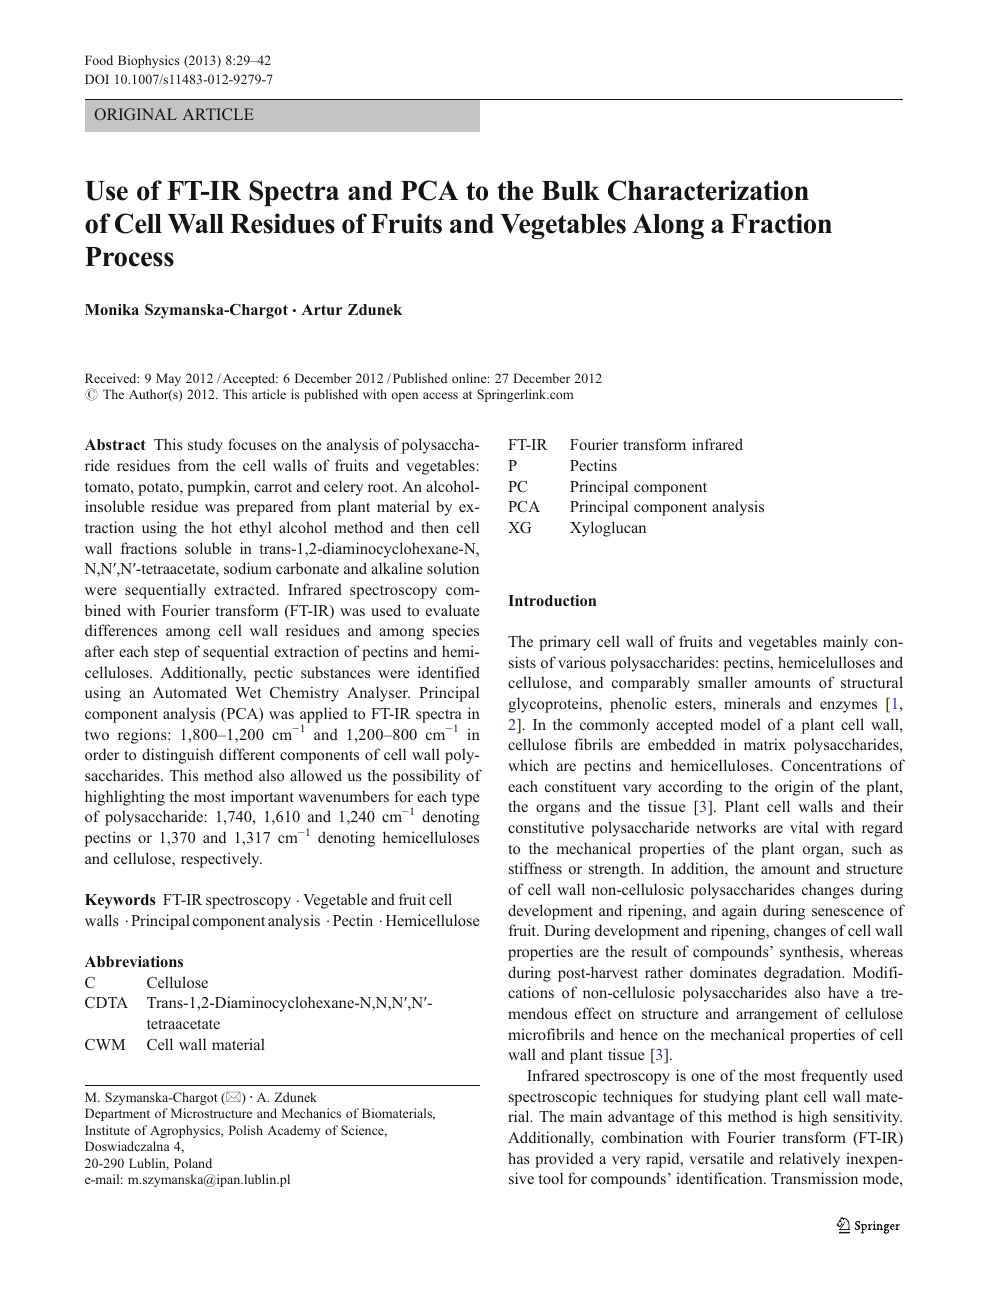 Use Of Ft Ir Spectra And Pca To The Bulk Characterization Of Cell Wall Residues Of Fruits And Vegetables Along A Fraction Process Topic Of Research Paper In Chemical Sciences Download Scholarly